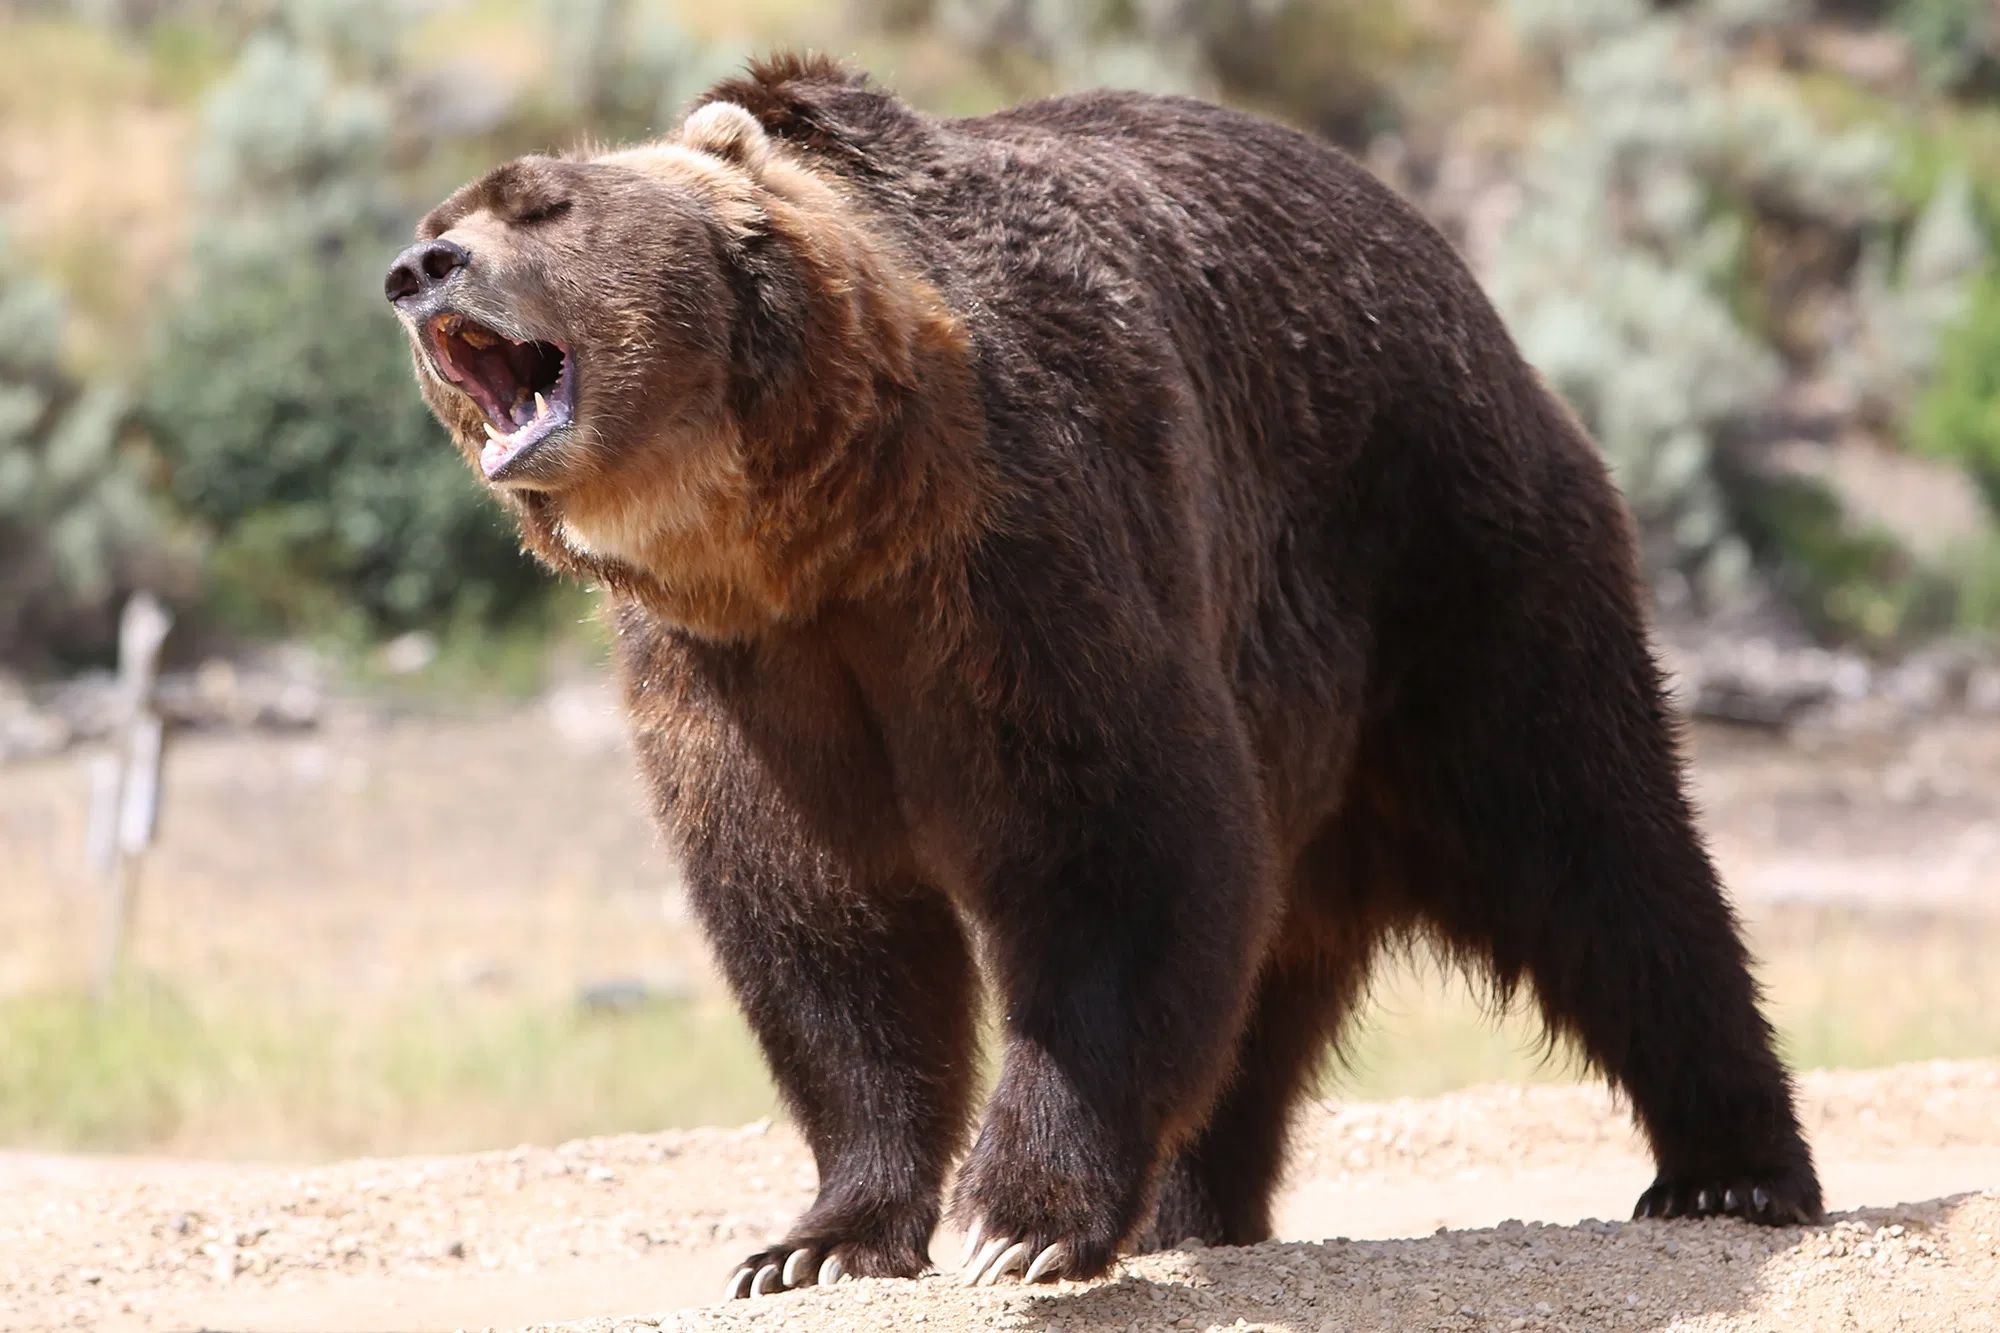 A grizzly bear, which was faked on Man vs Wild.